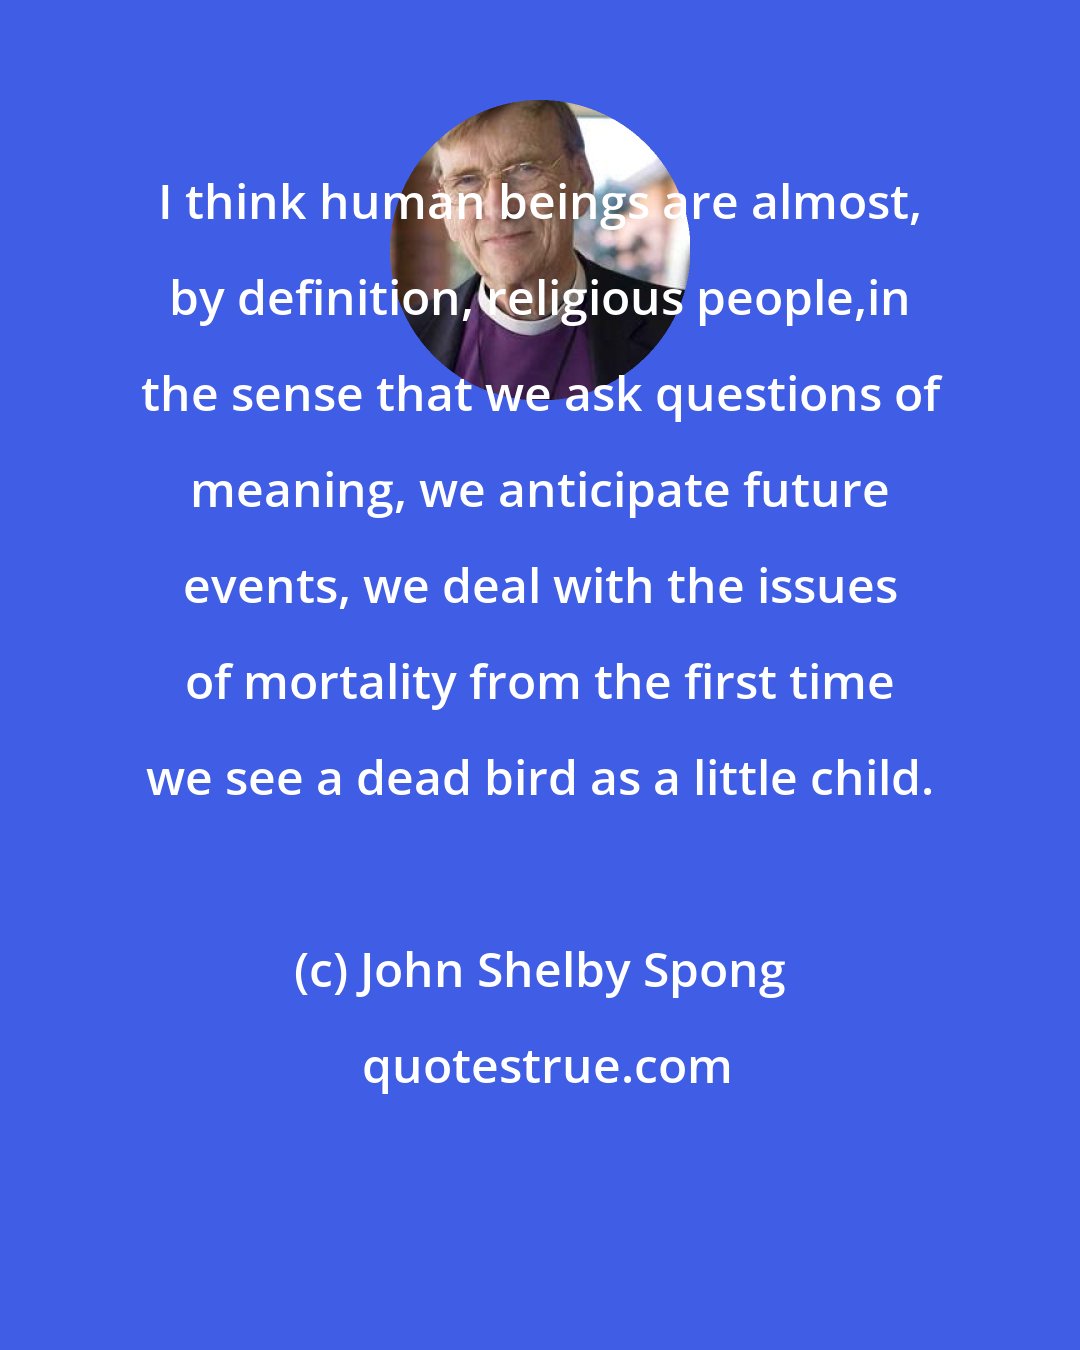 John Shelby Spong: I think human beings are almost, by definition, religious people,in the sense that we ask questions of meaning, we anticipate future events, we deal with the issues of mortality from the first time we see a dead bird as a little child.